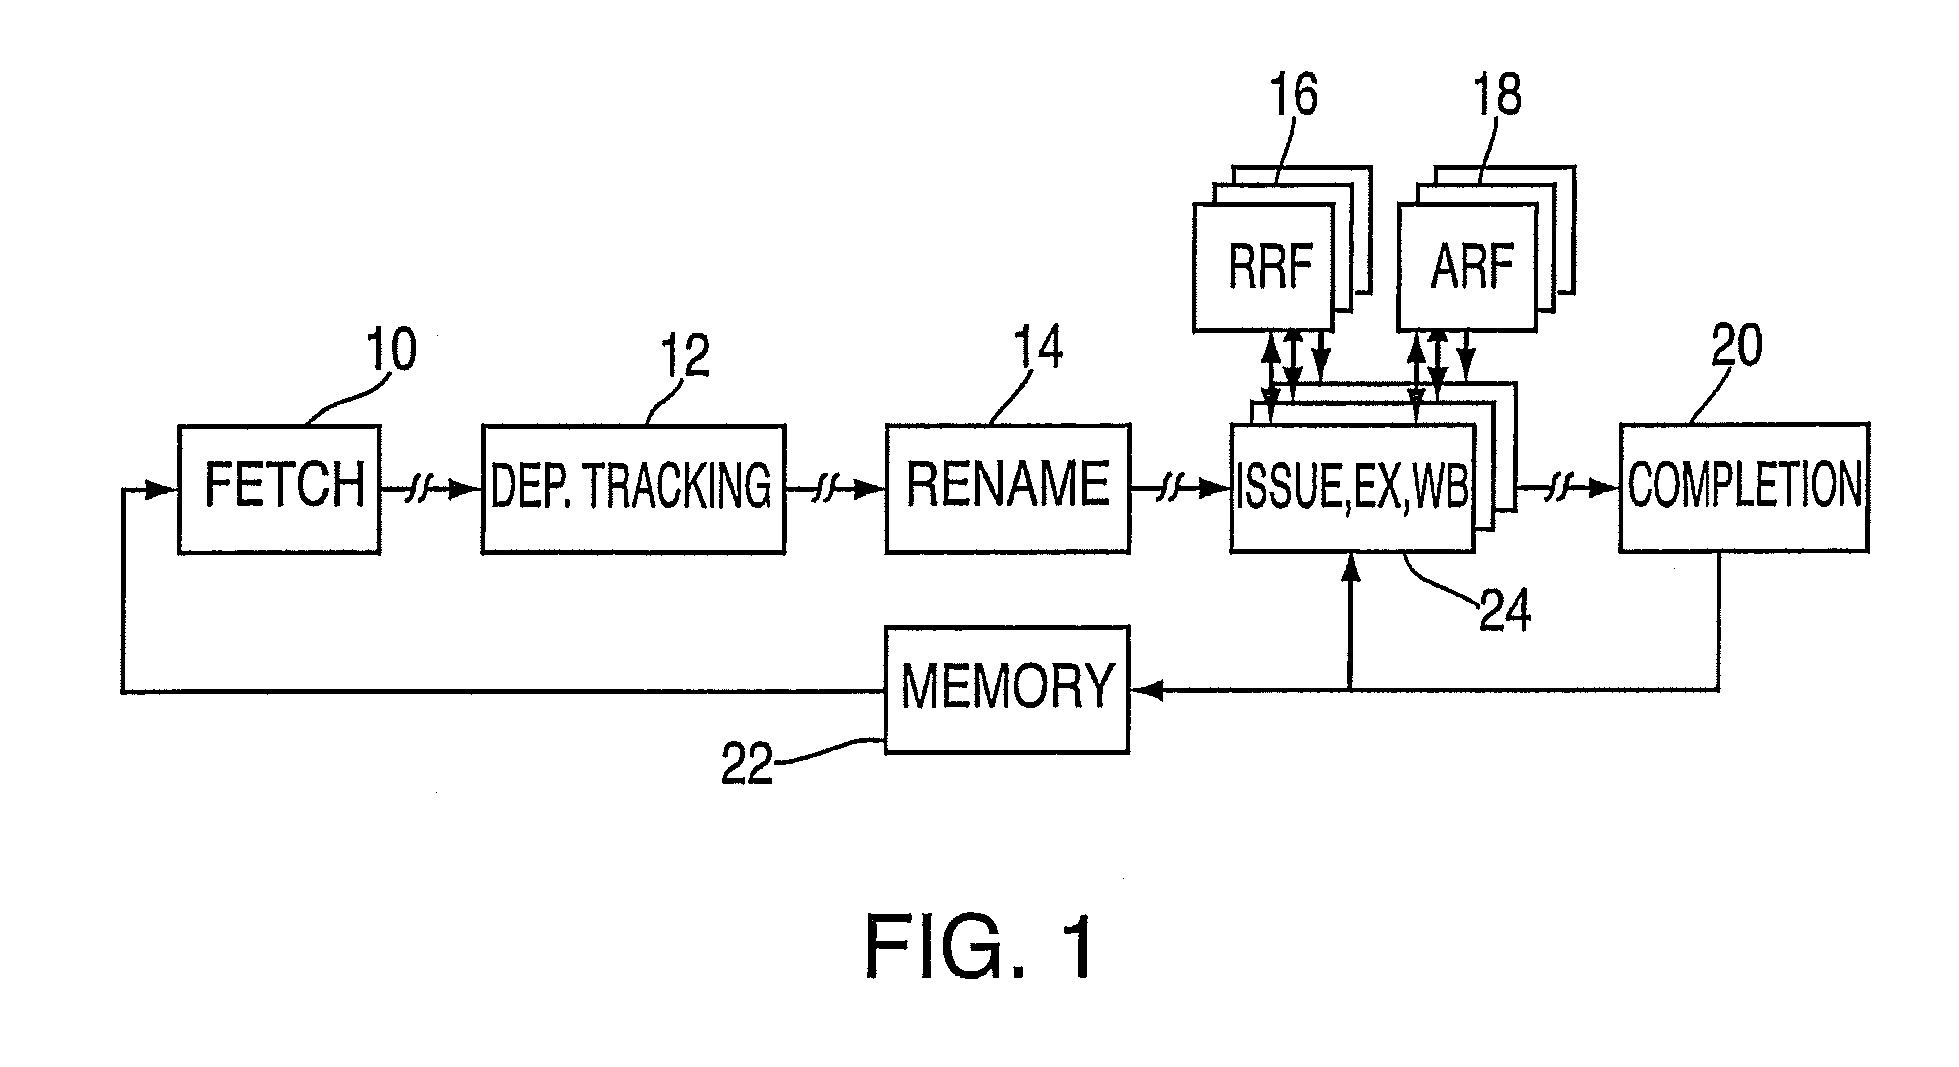 Method And Apparatus For Register Renaming Using Multiple Physical Register Files And Avoiding Associative Search